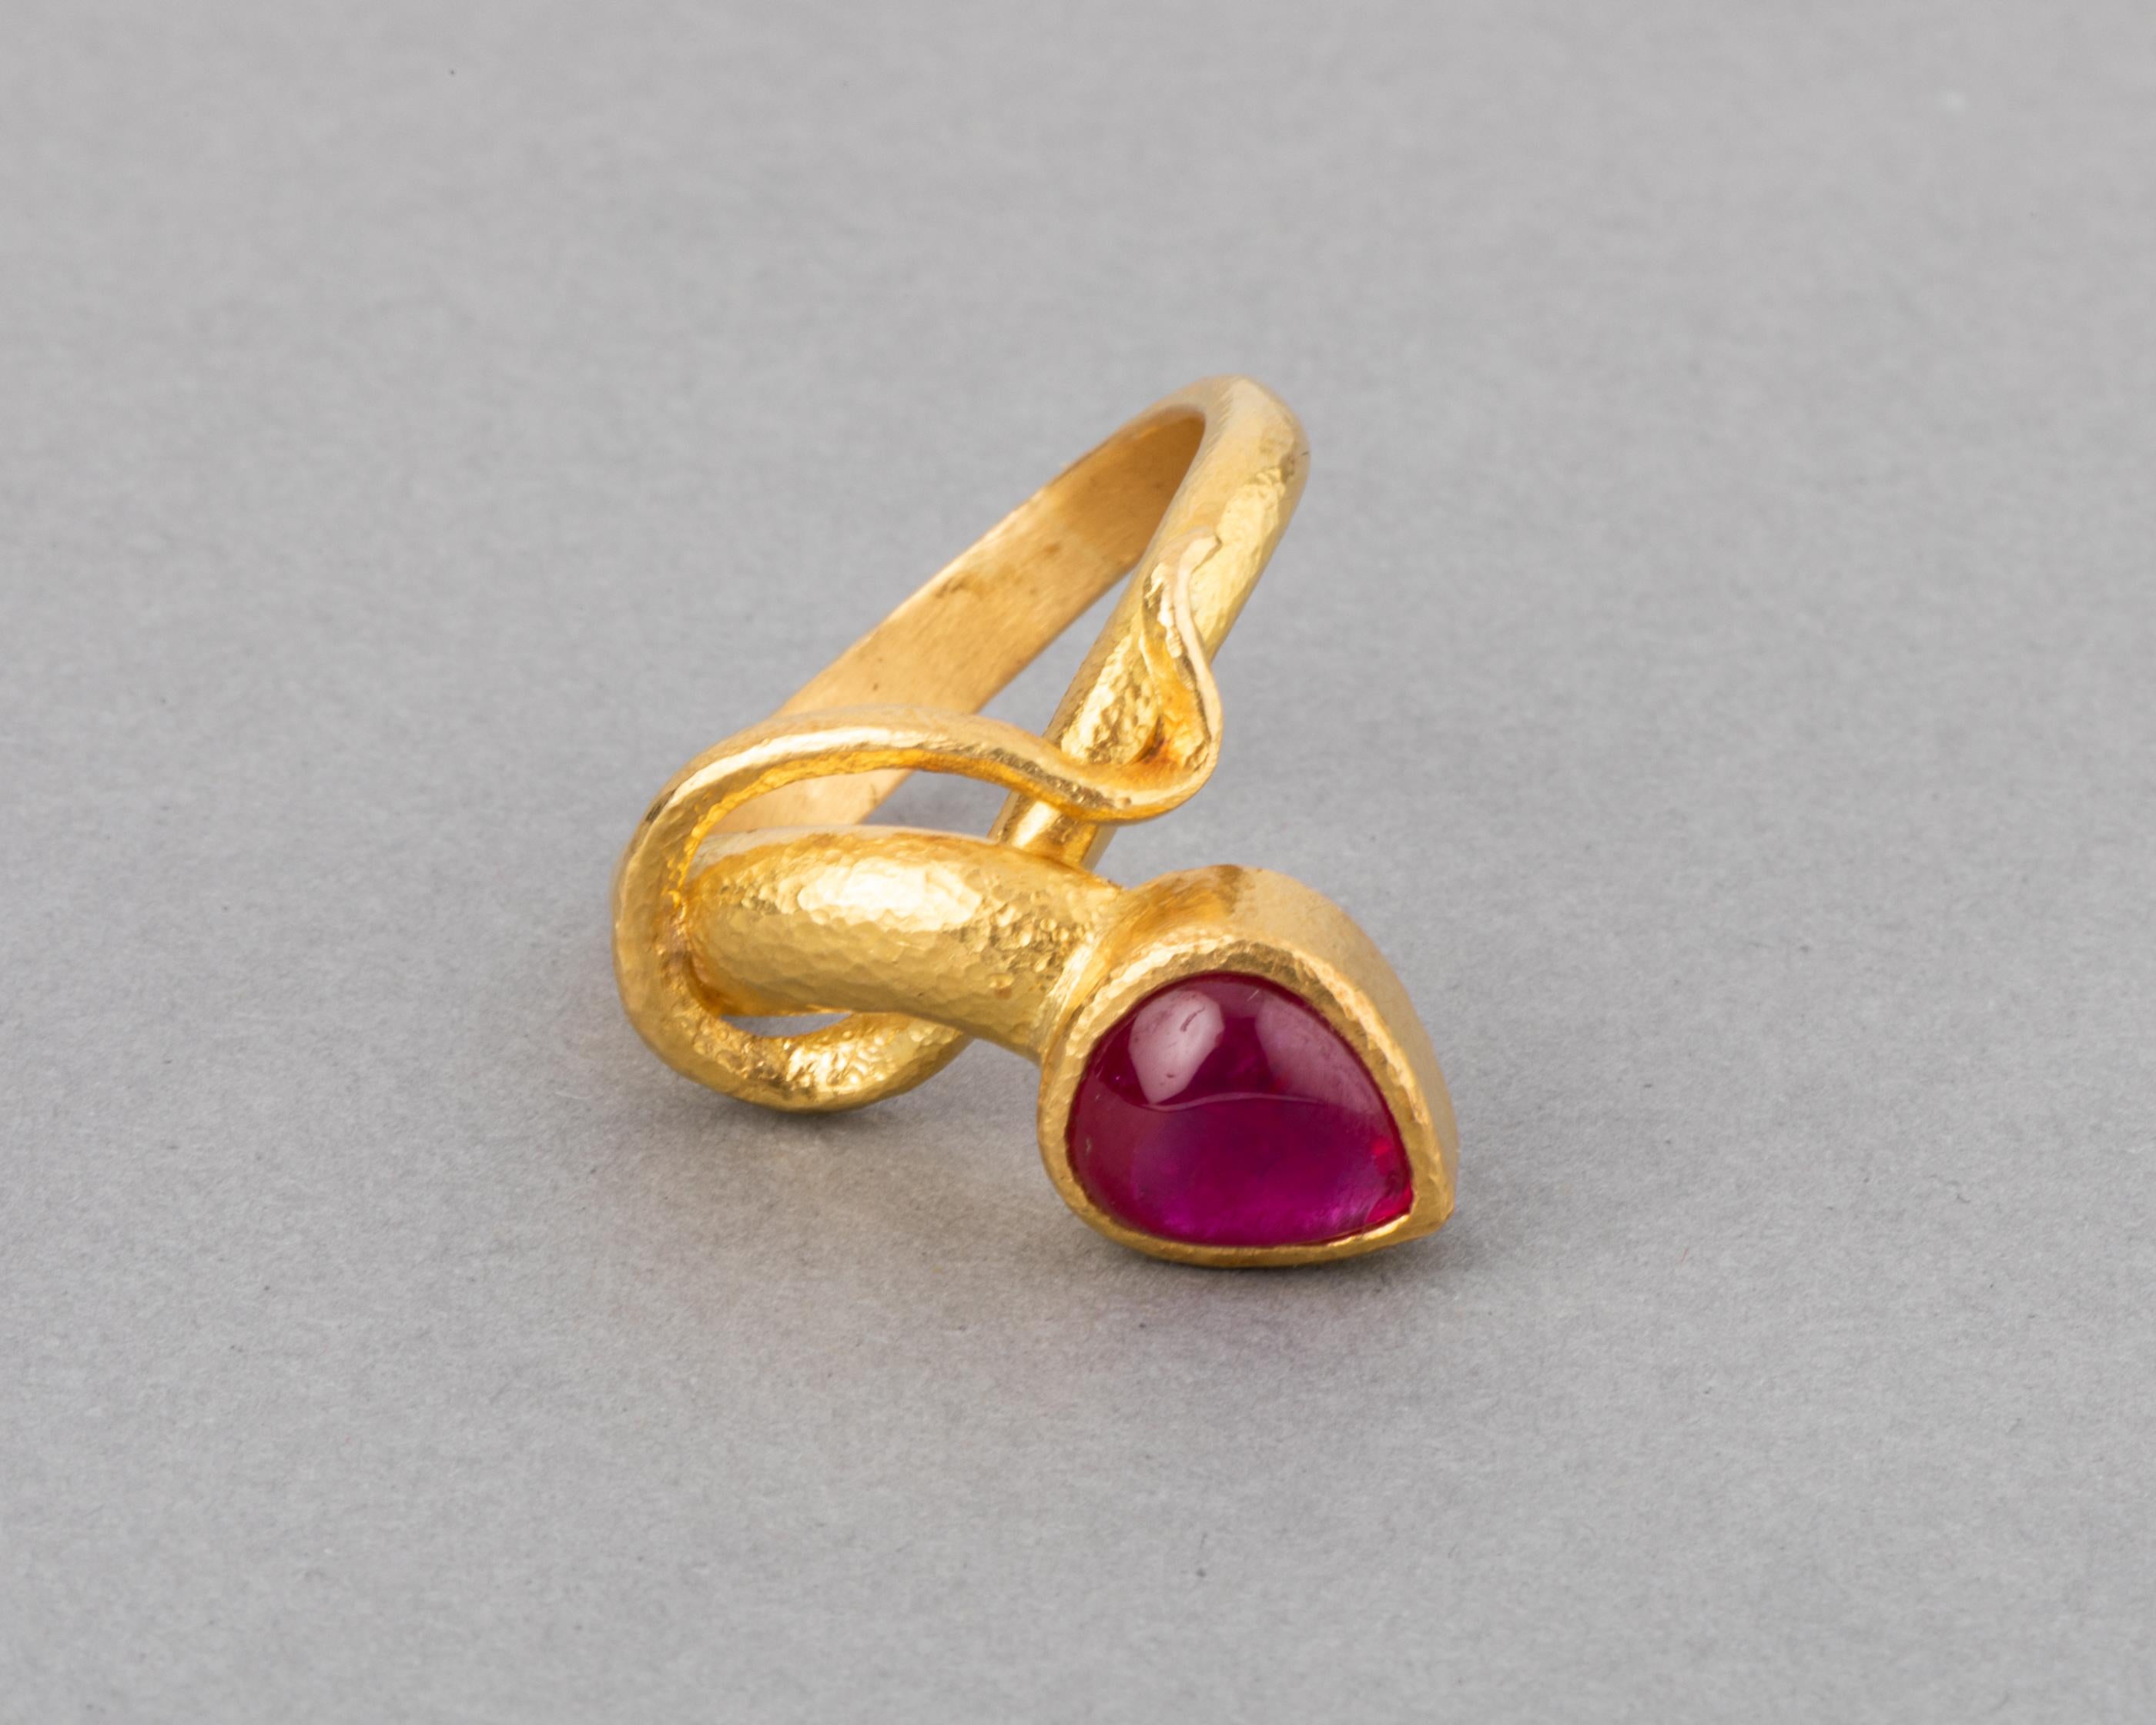 Women's Gold and Ruby French Ring by Bernardeau